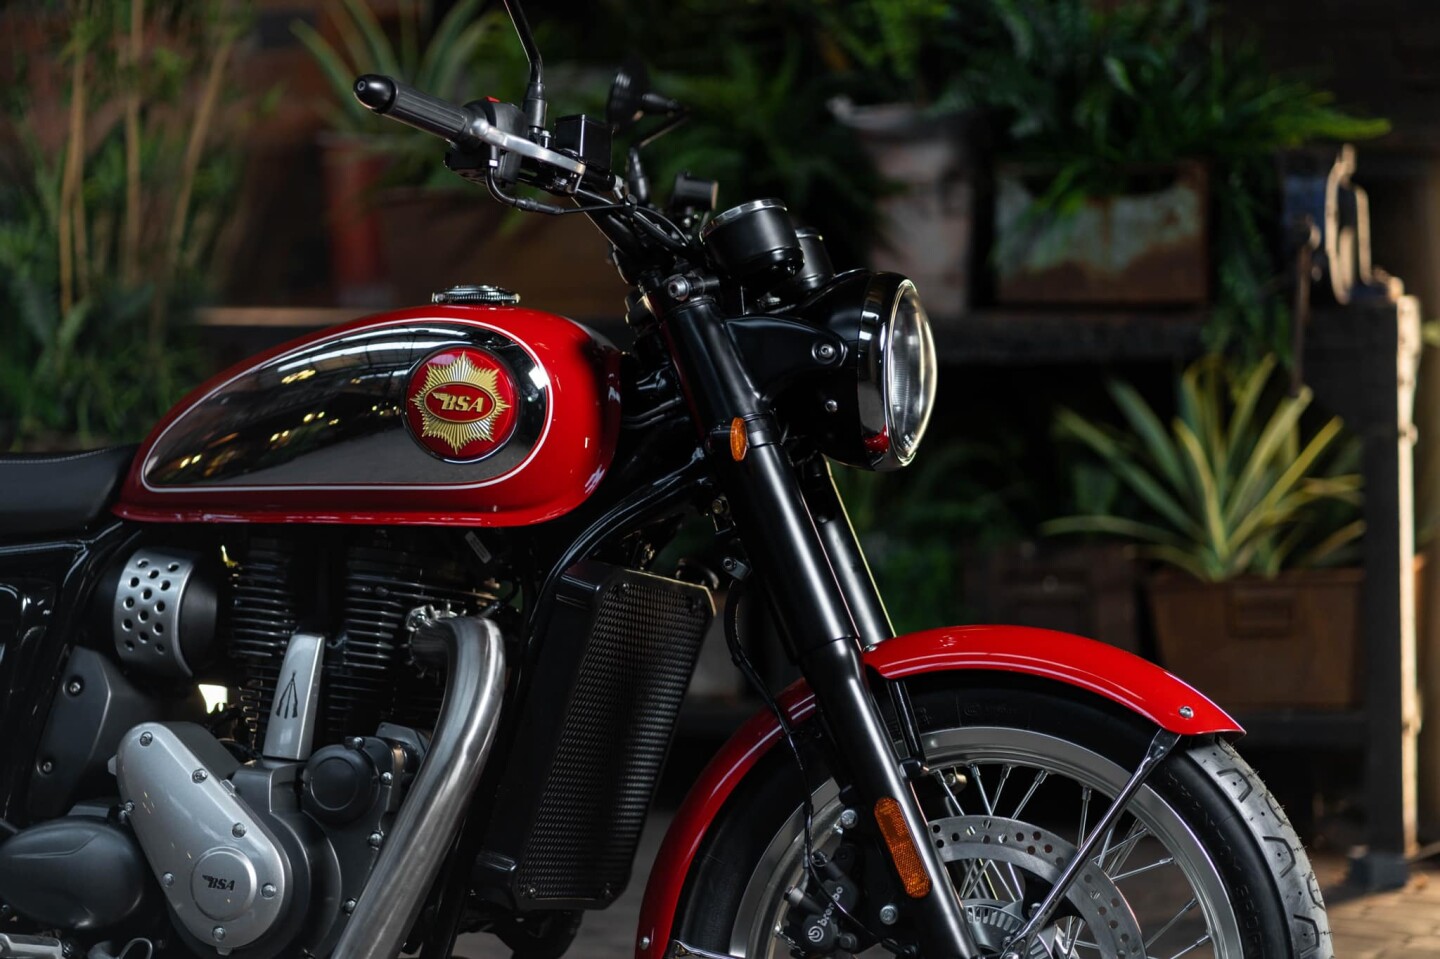 All-New BSA Gold Star 650 Revealed Ahead of Schedule - webBikeWorld